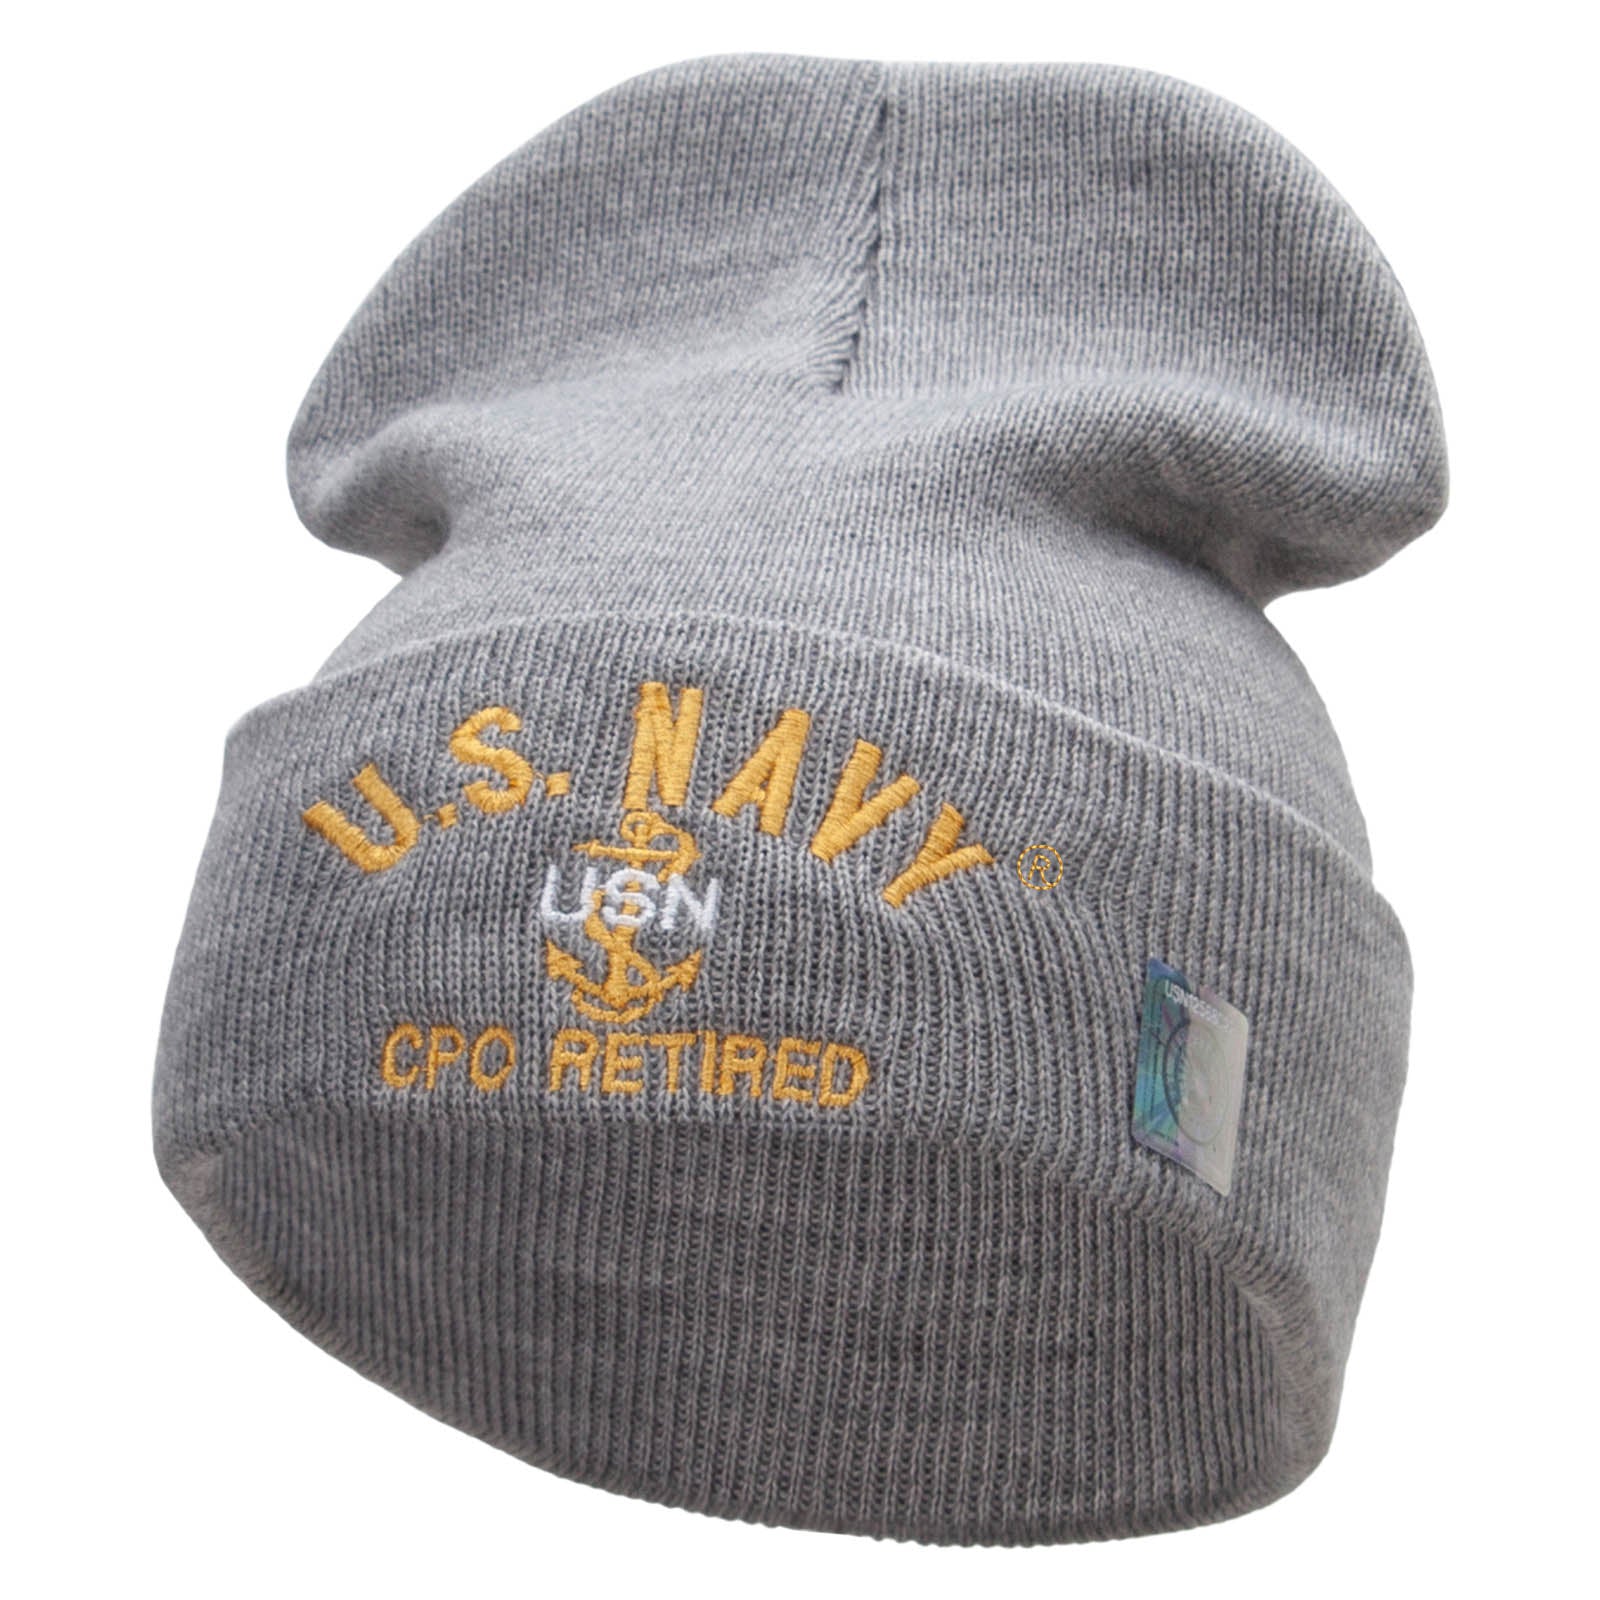 Licensed US Navy CPO Retired Military Embroidered Long Beanie Made in USA - Lt Grey OSFM